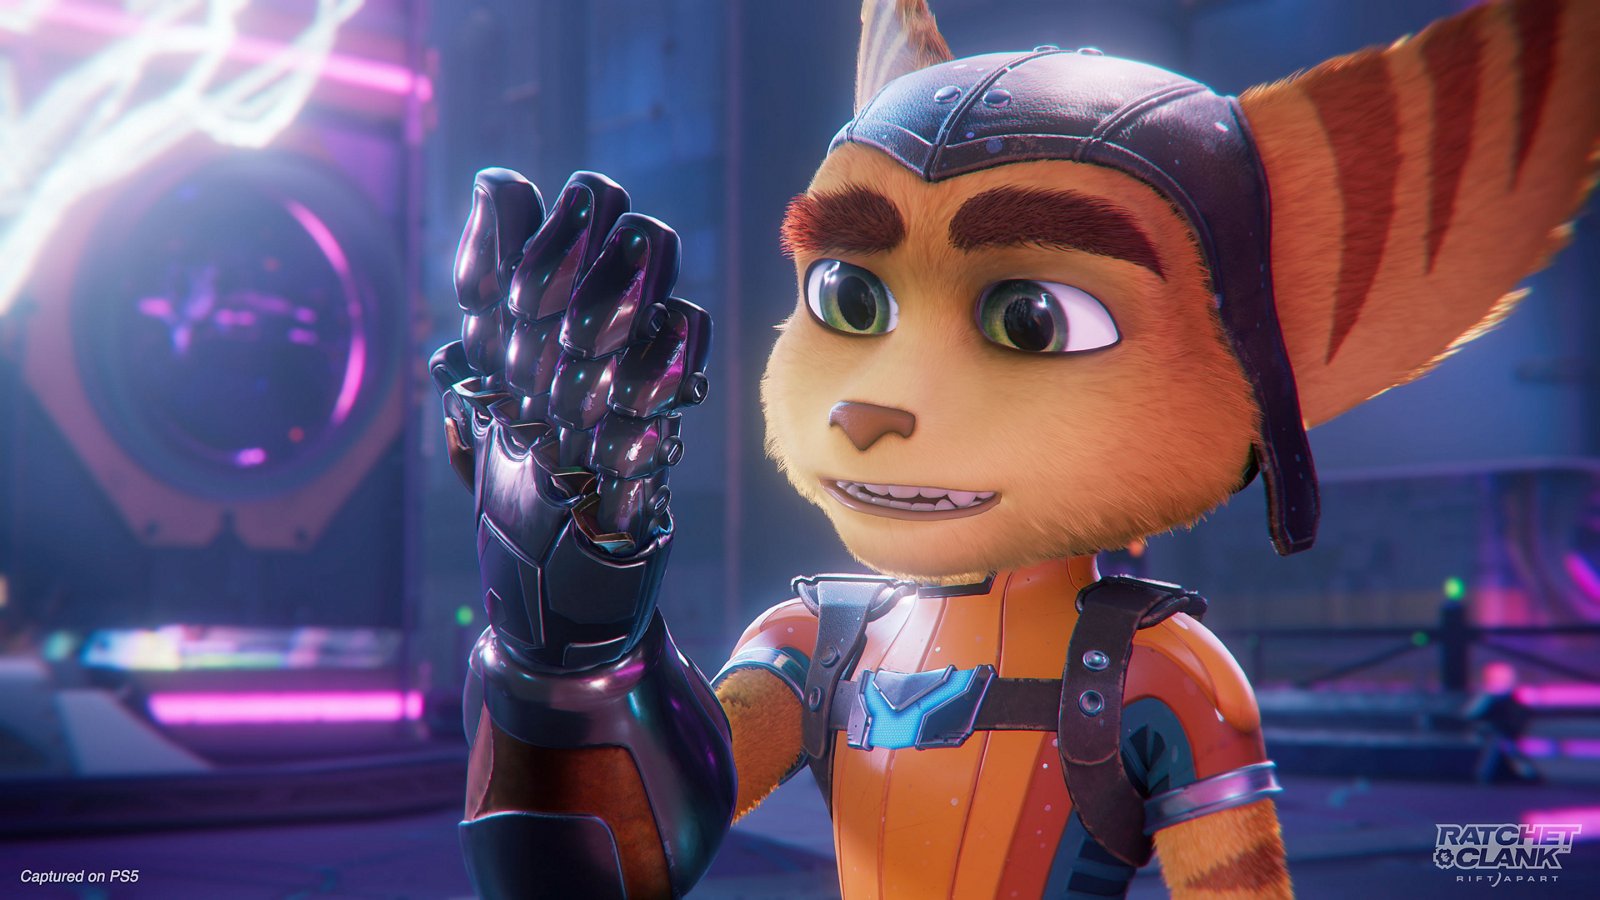 Ratchet from the Ratchet and Clank games stares at his glove quizically